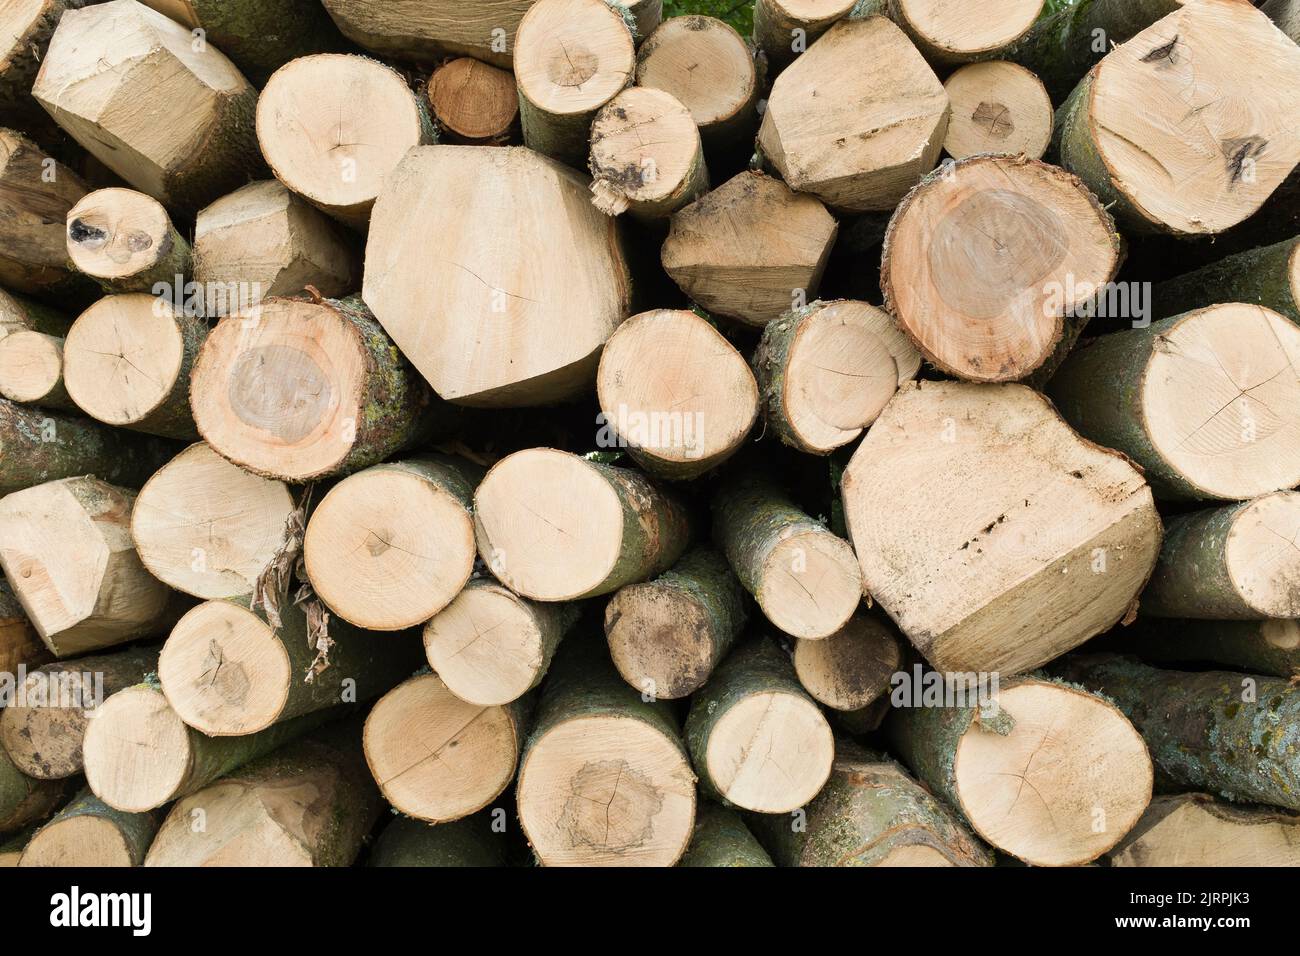 Logs stacked in a pile in a forest or garden setting. UK tree felling Stock Photo